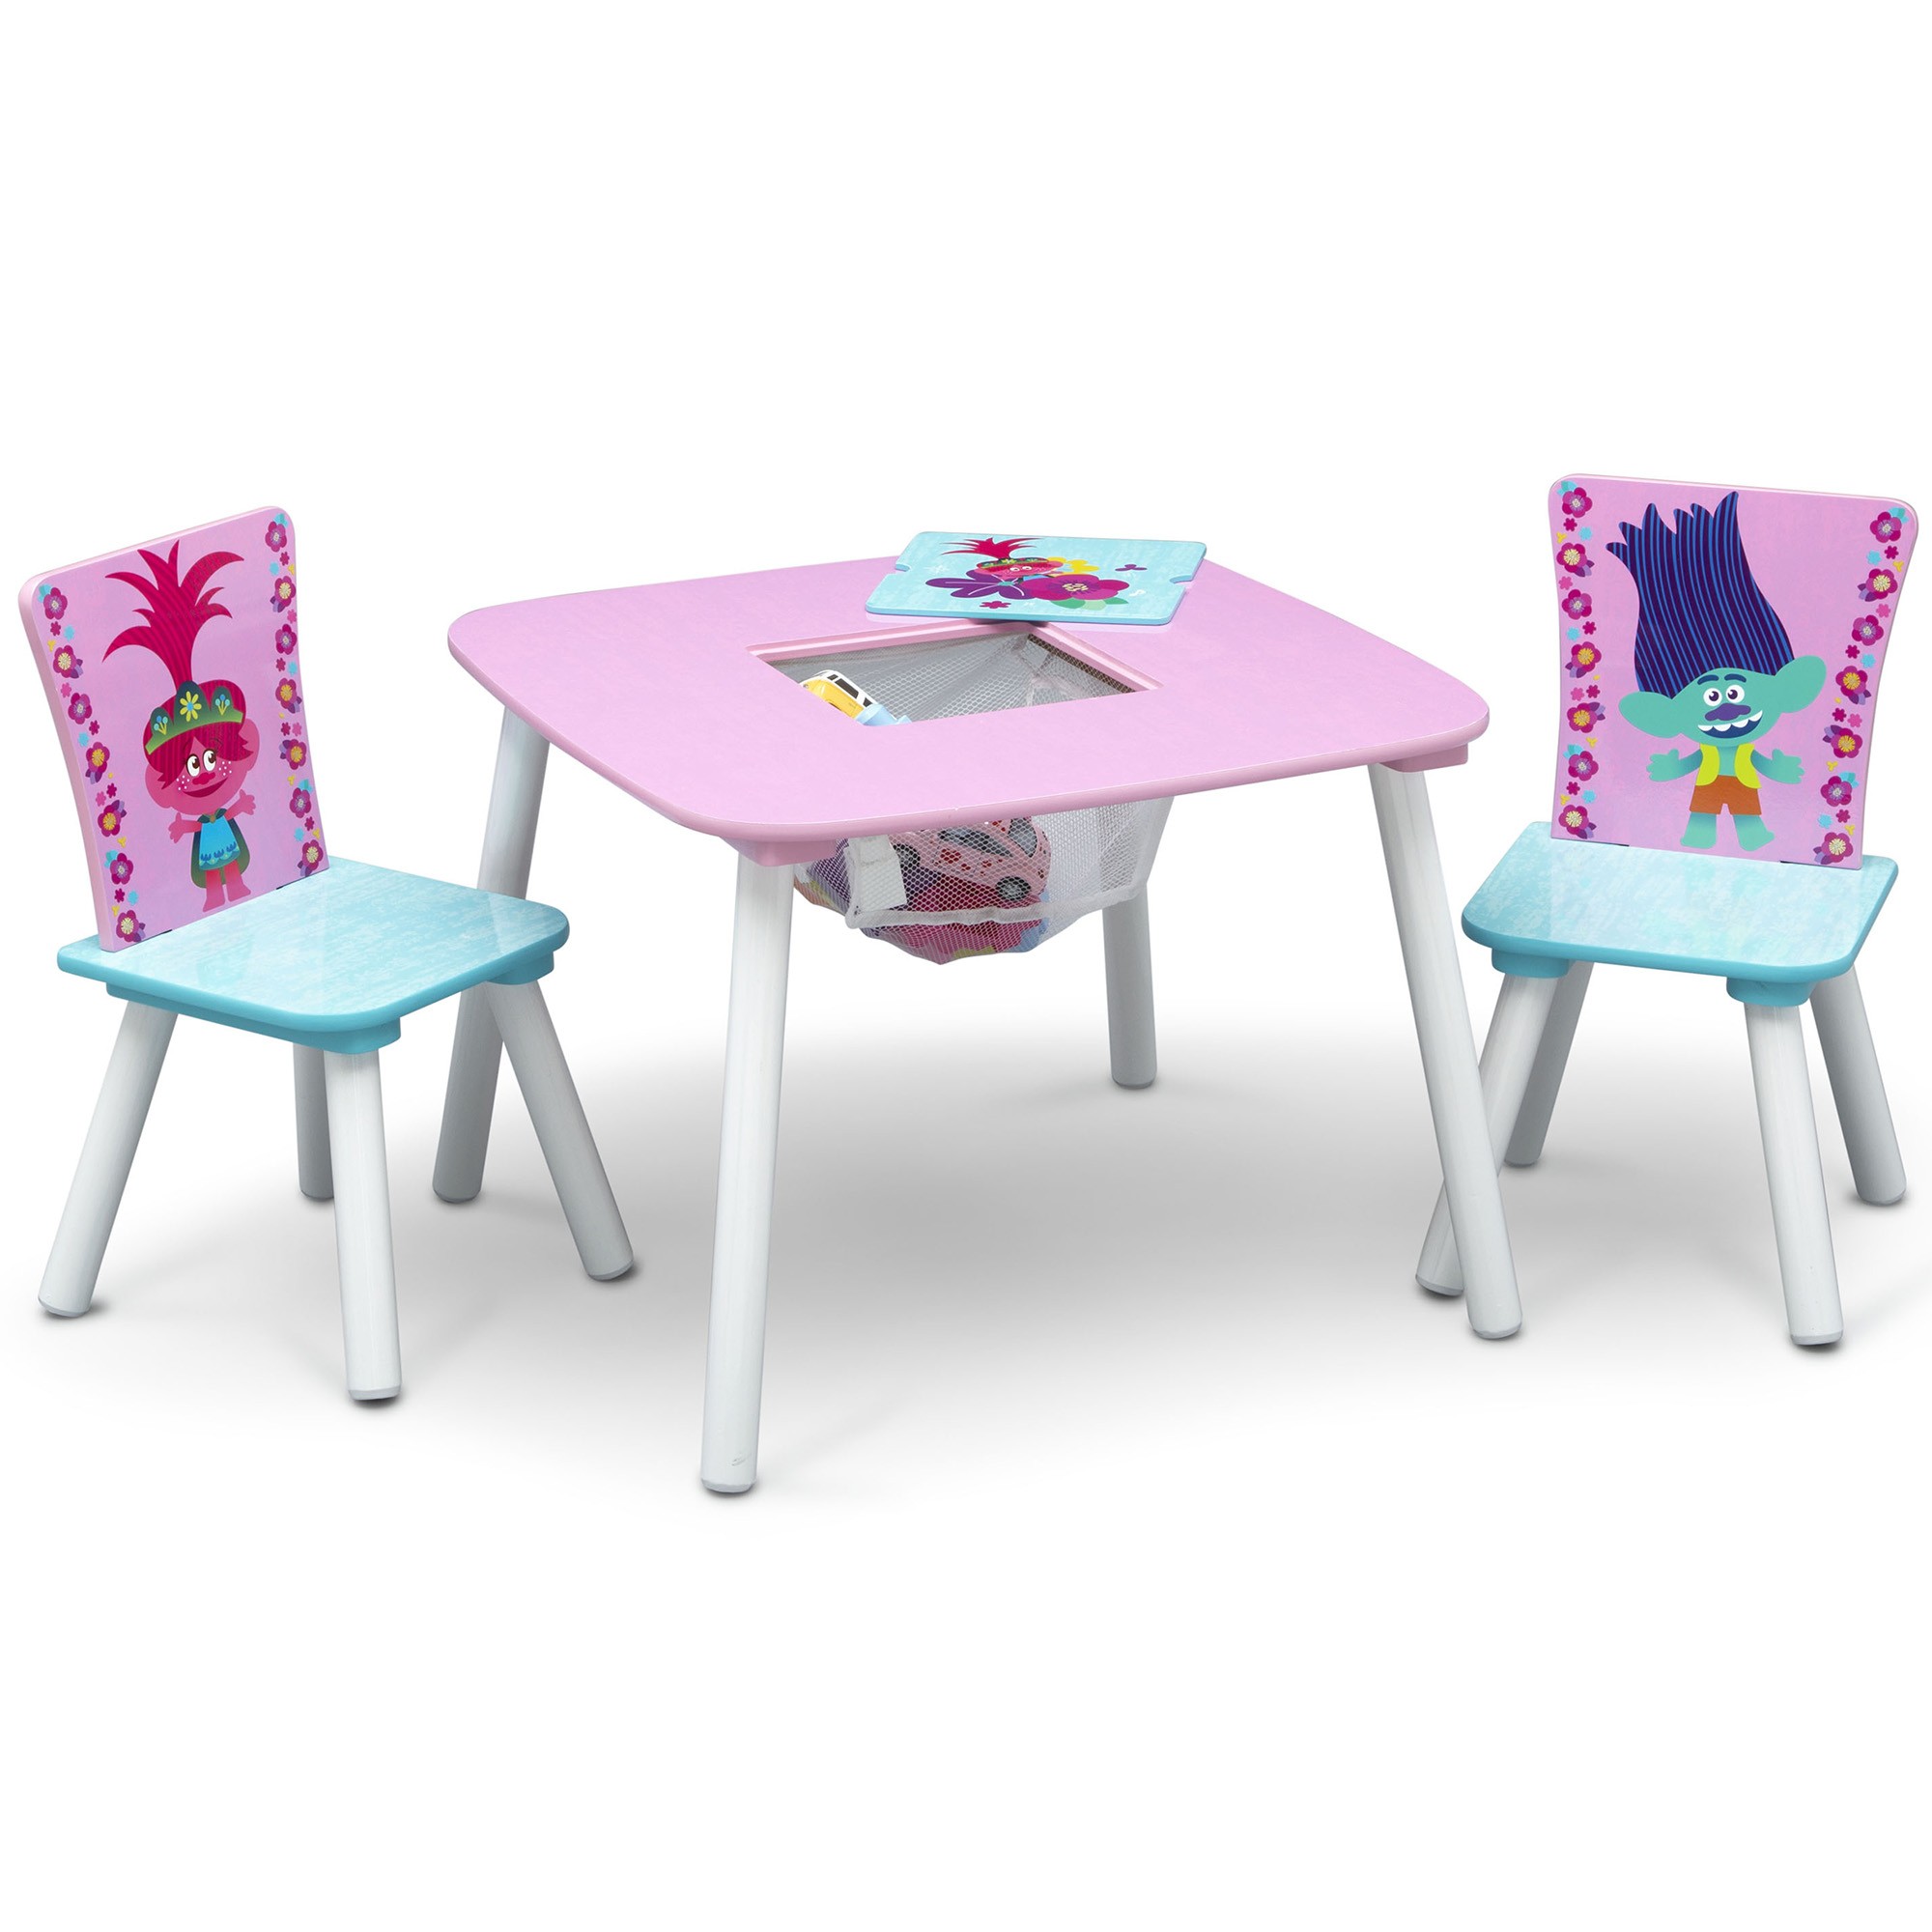 Trolls world tour table and chair set with storage by